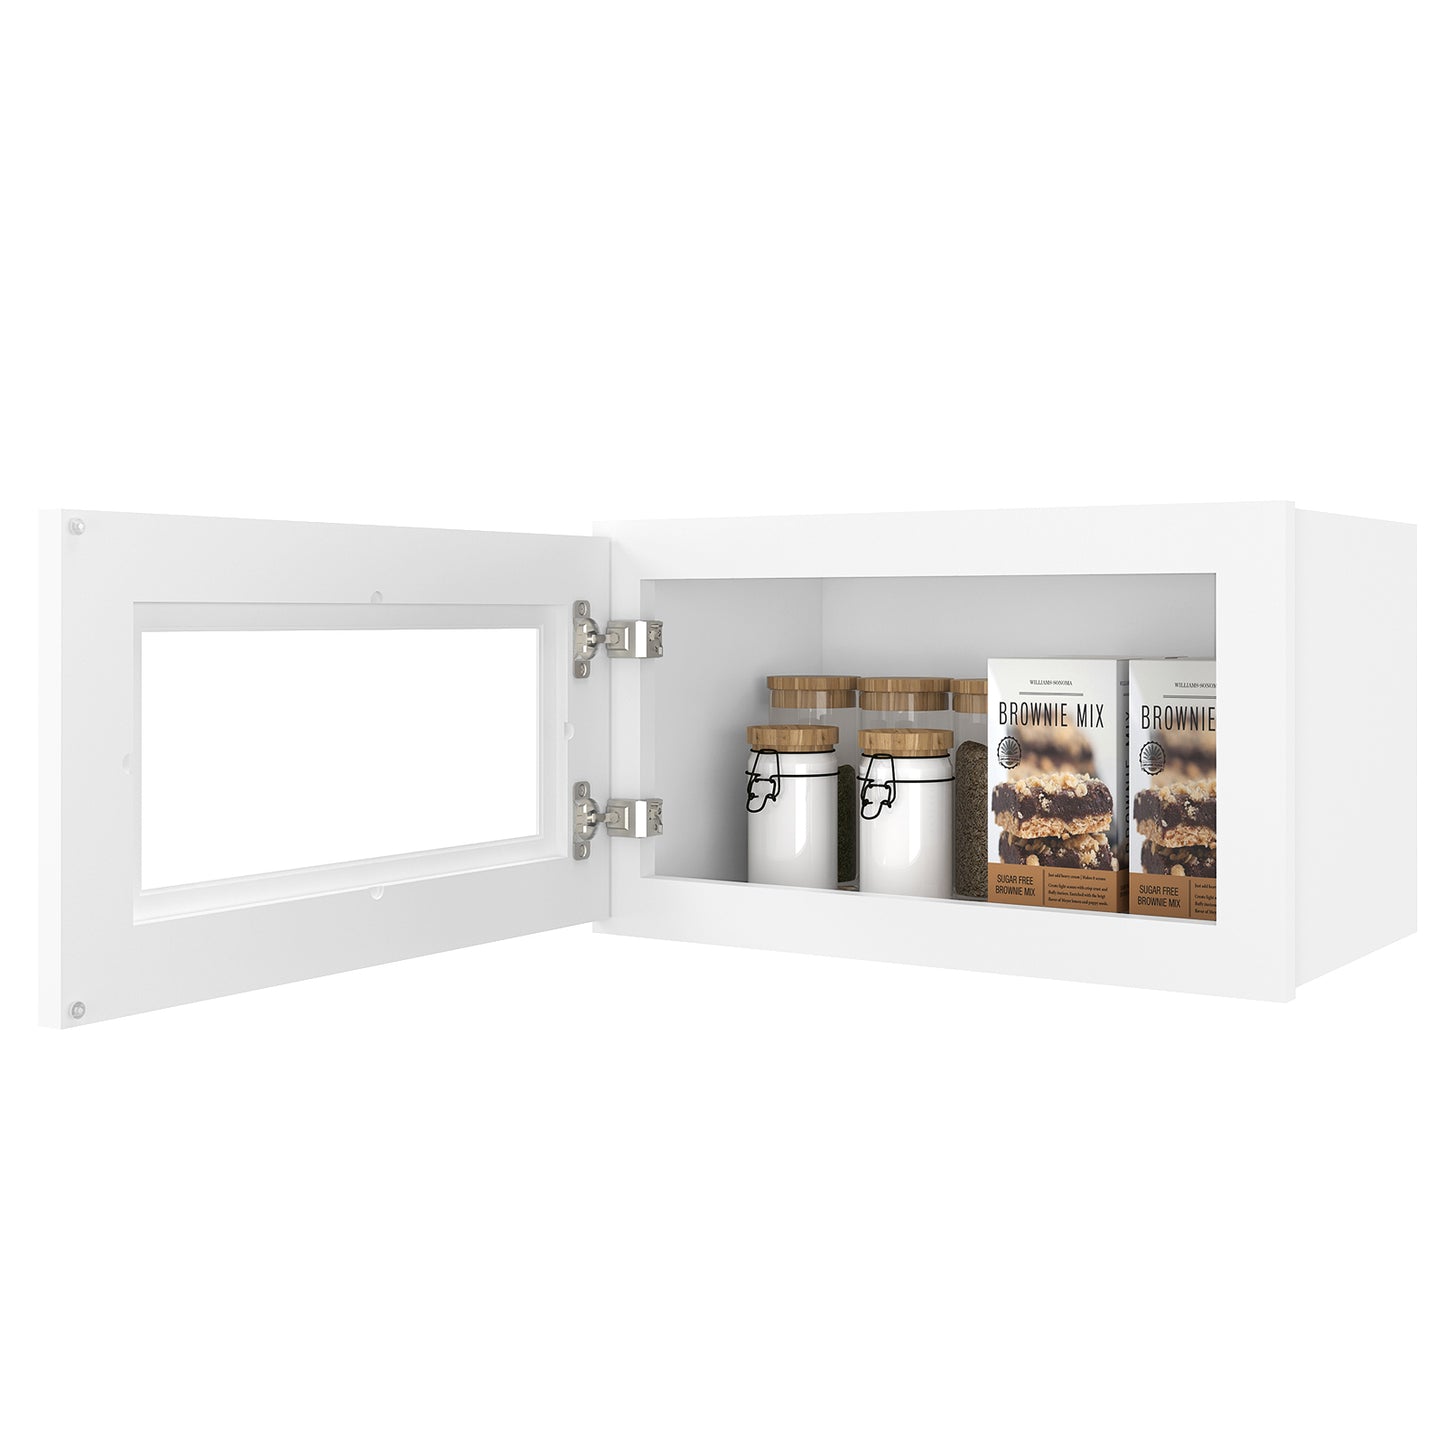 Medicine Cabinet Wall Mounted W2112GD